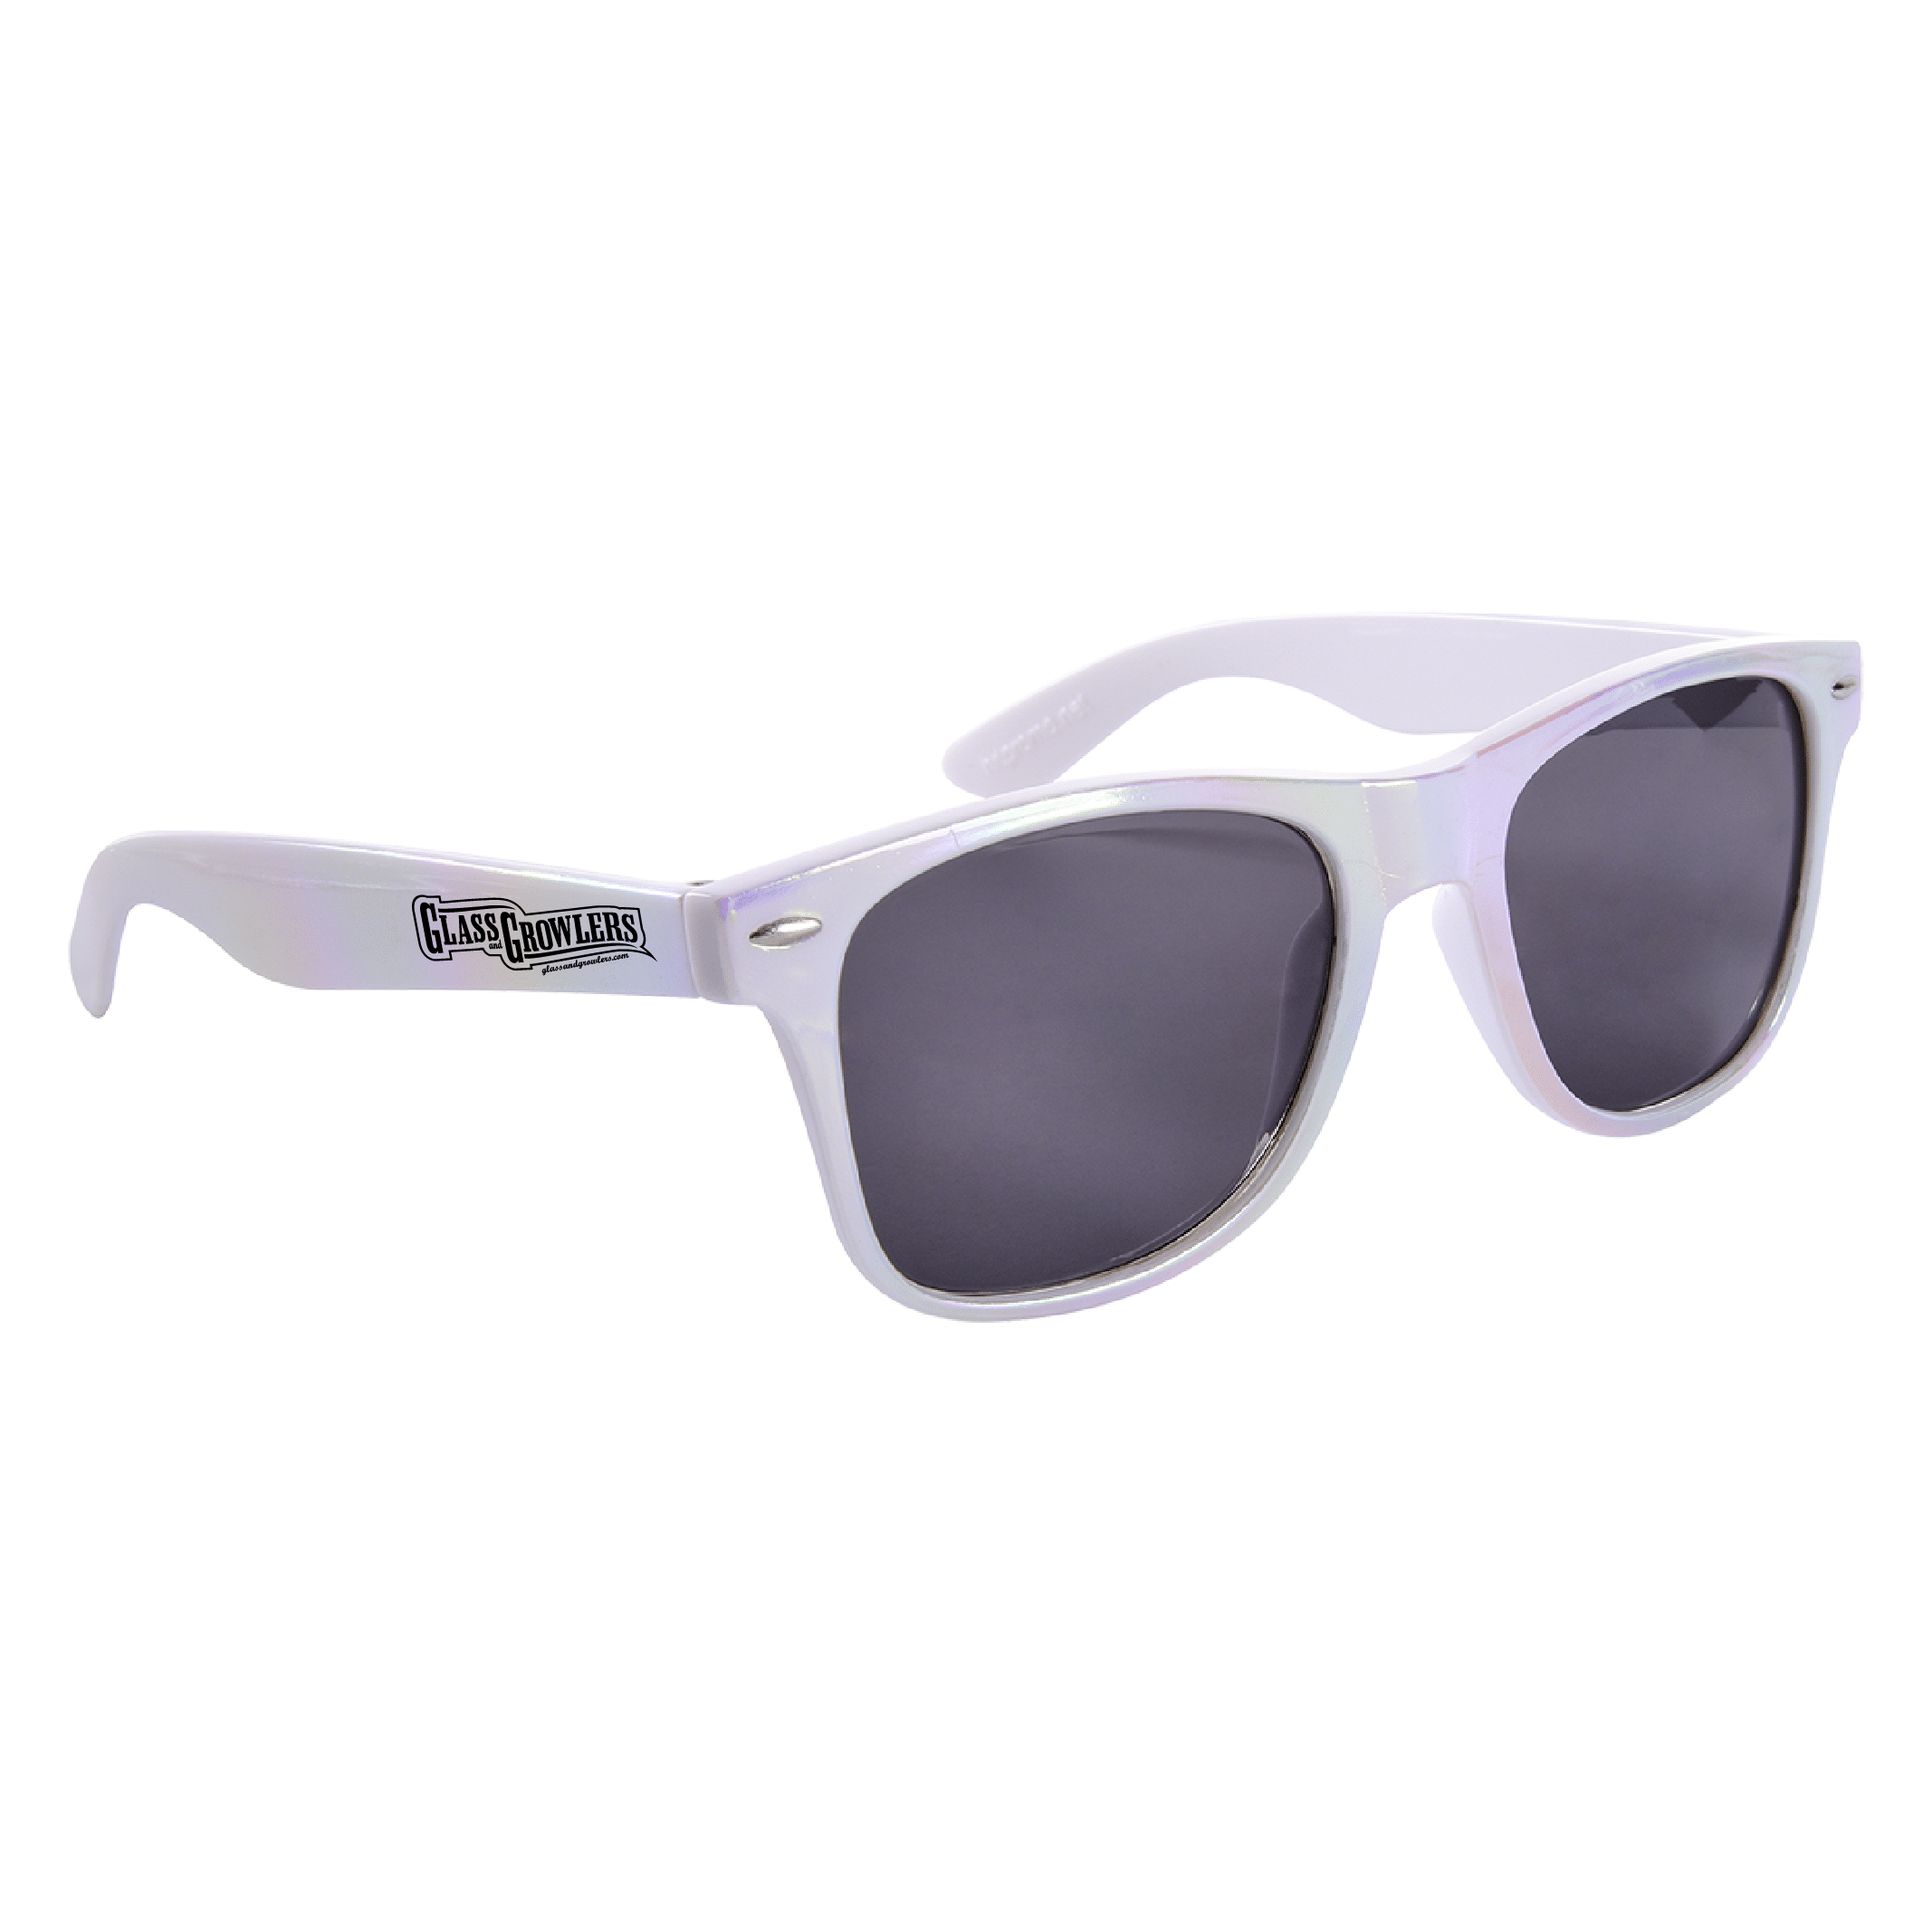 Sunglasses made from RPET recycled plastic - With custom print